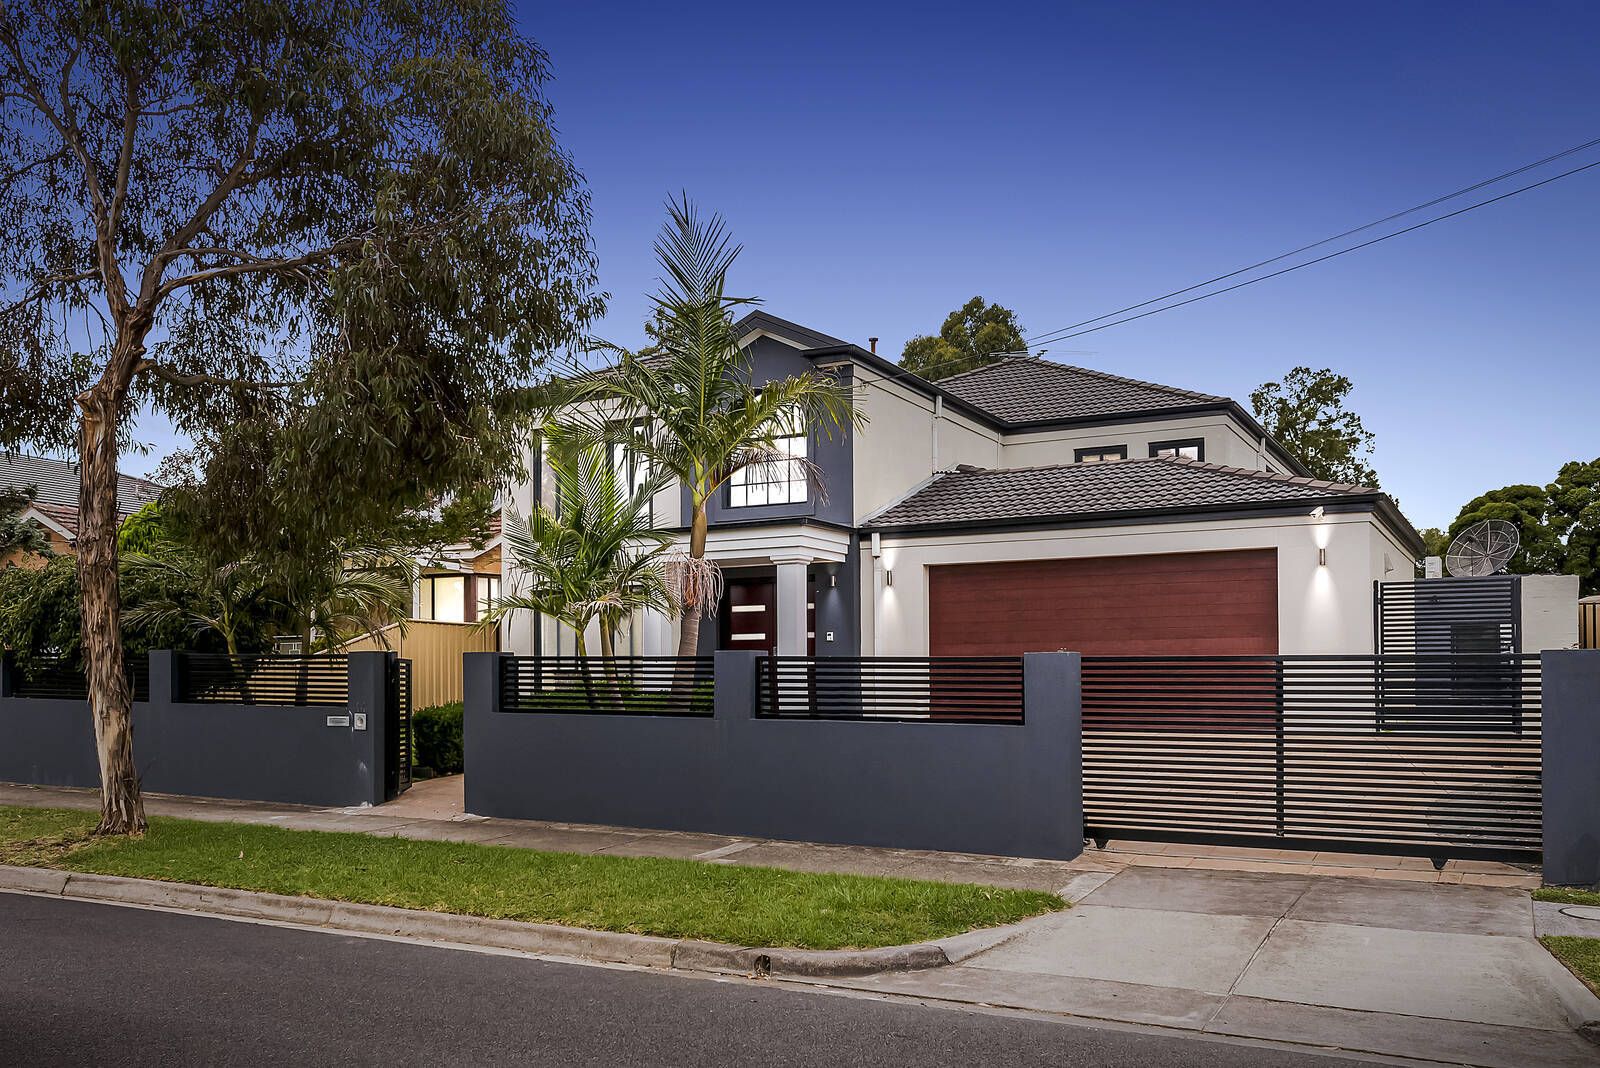 4 bedrooms House in 14 Silver Ash Avenue ASHWOOD VIC, 3147